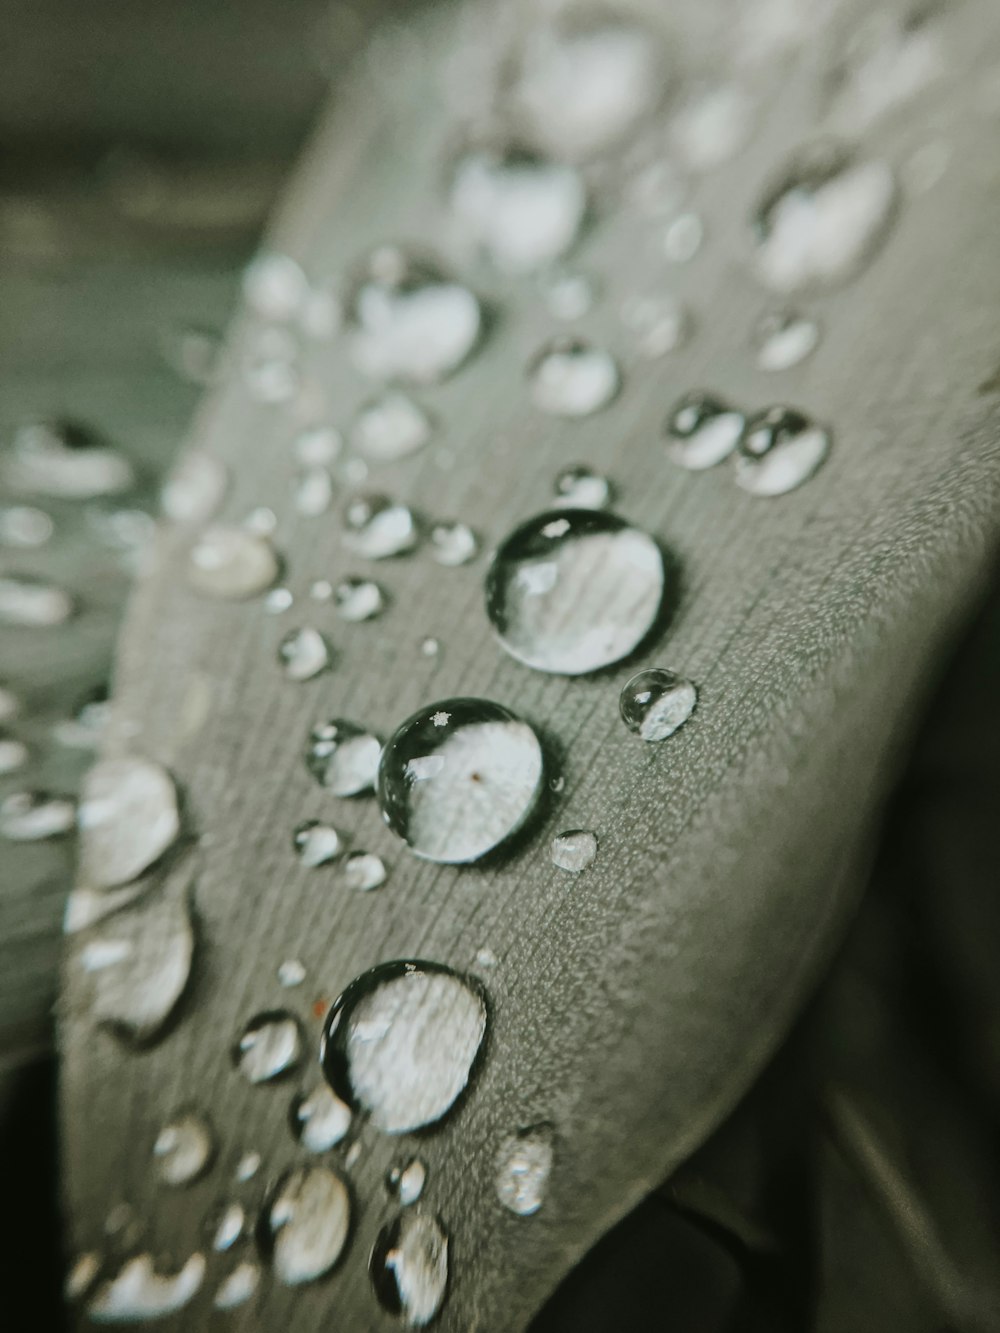 a close up of water droplets on a cloth